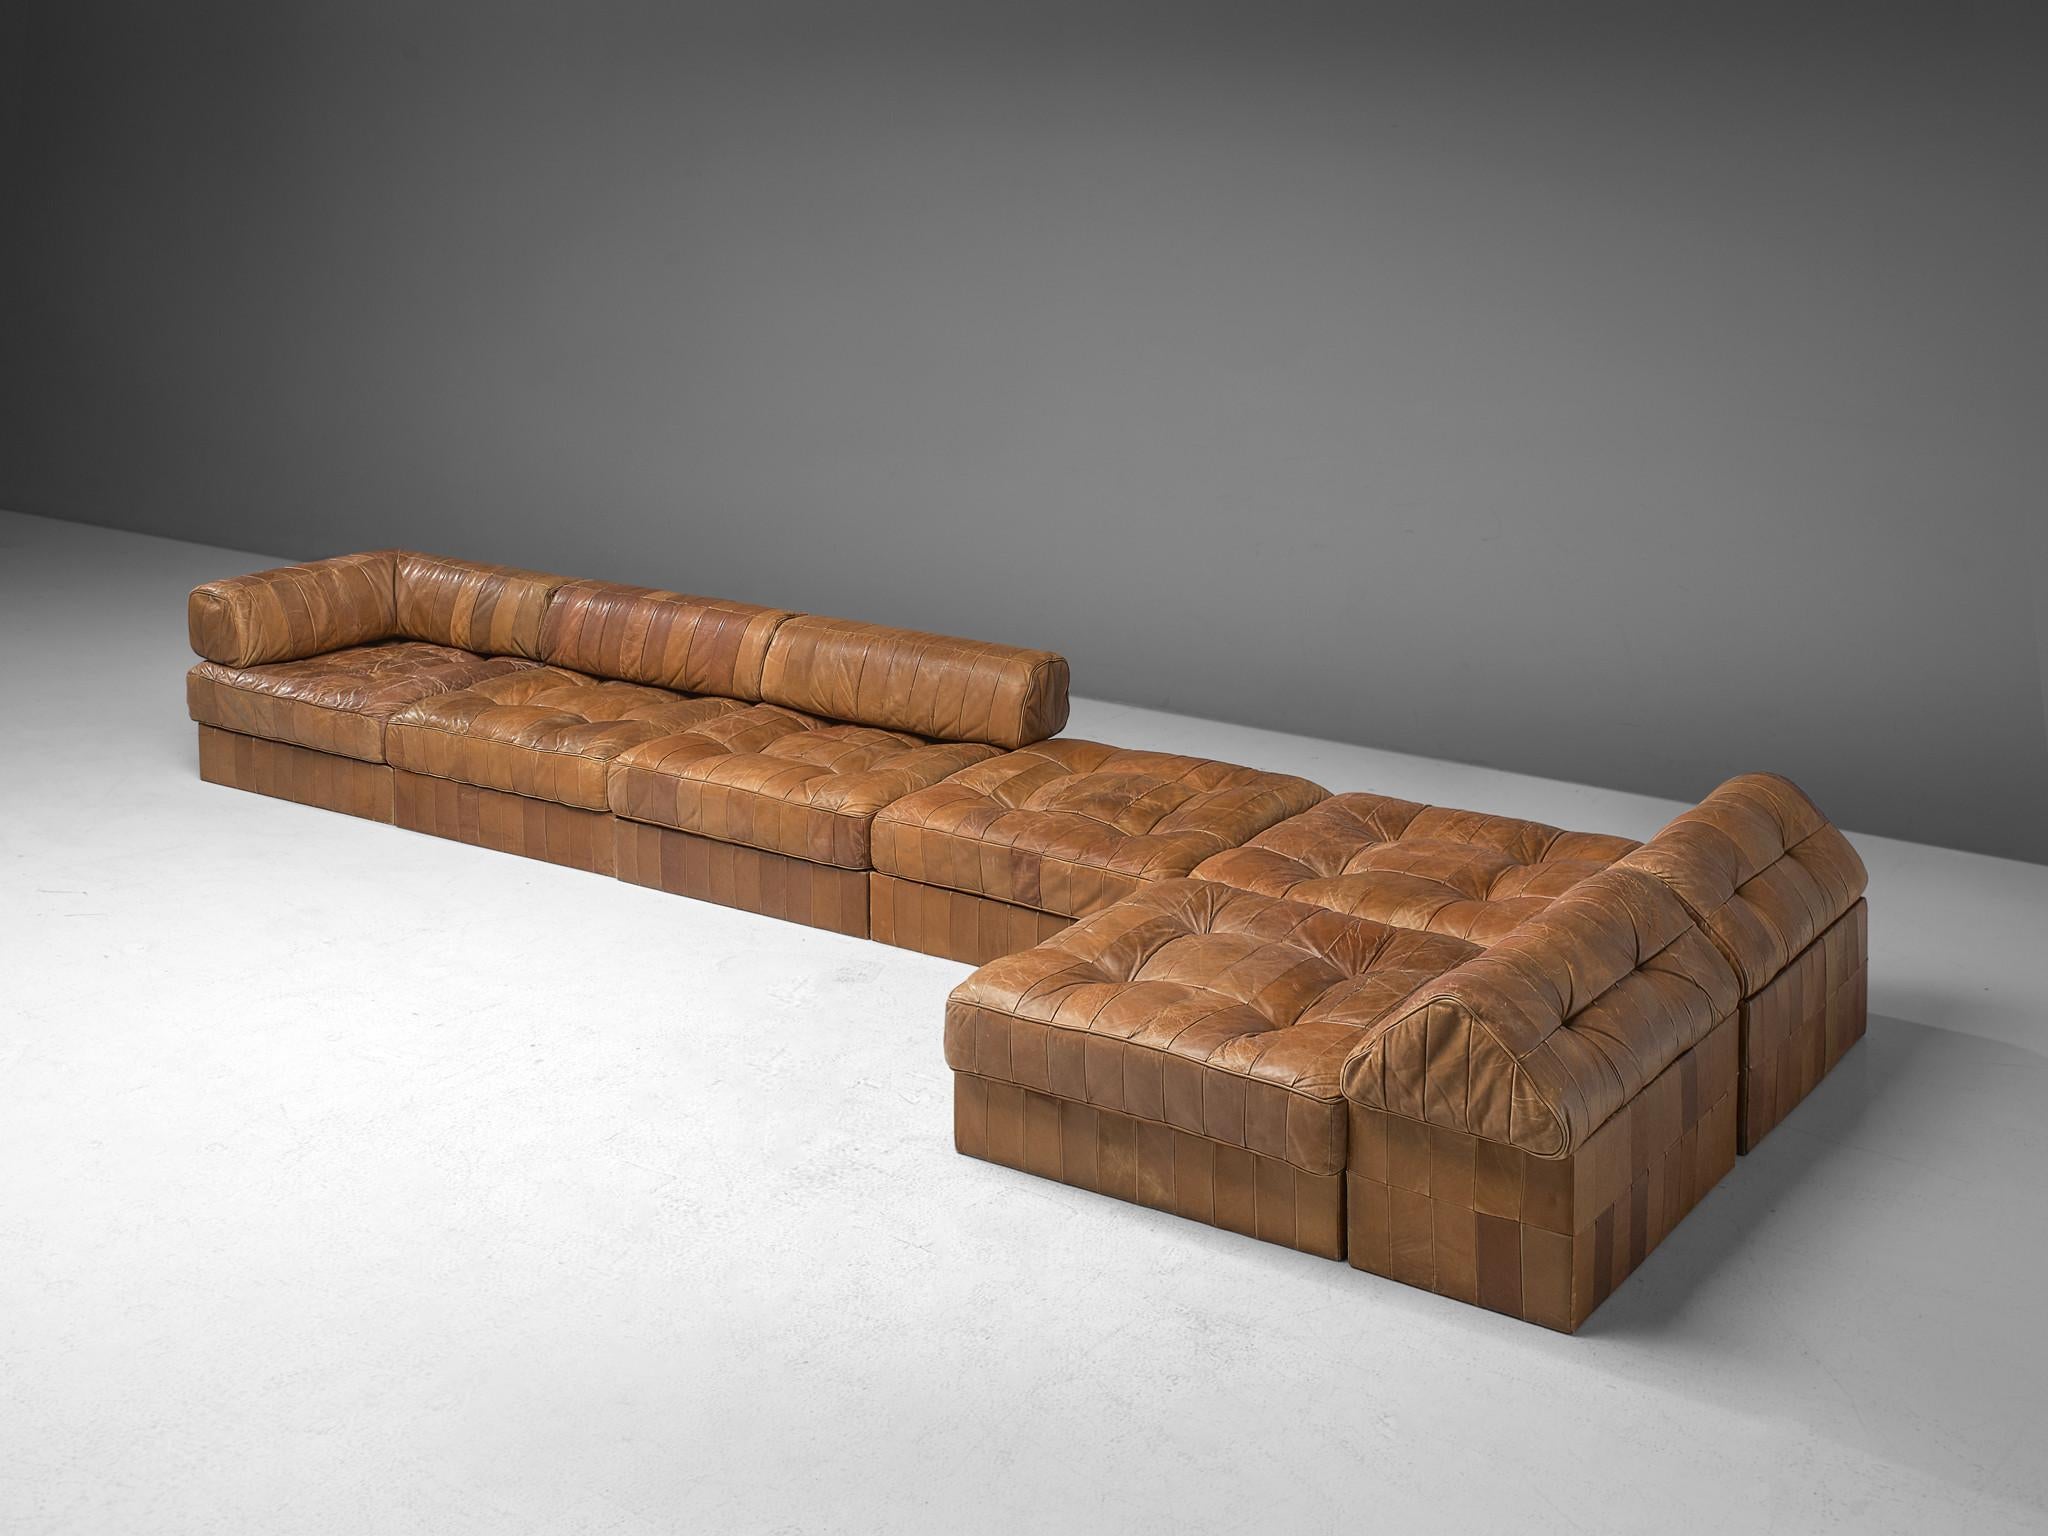 De Sede, modular sofa, cognac patinated leather, Switzerland, 1970s. 

This comfortable leather sofa is made by quality manufacturer De Sede in Switzerland. Known for its craftsmanship, highest quality leather and unique aesthetics, De Sede